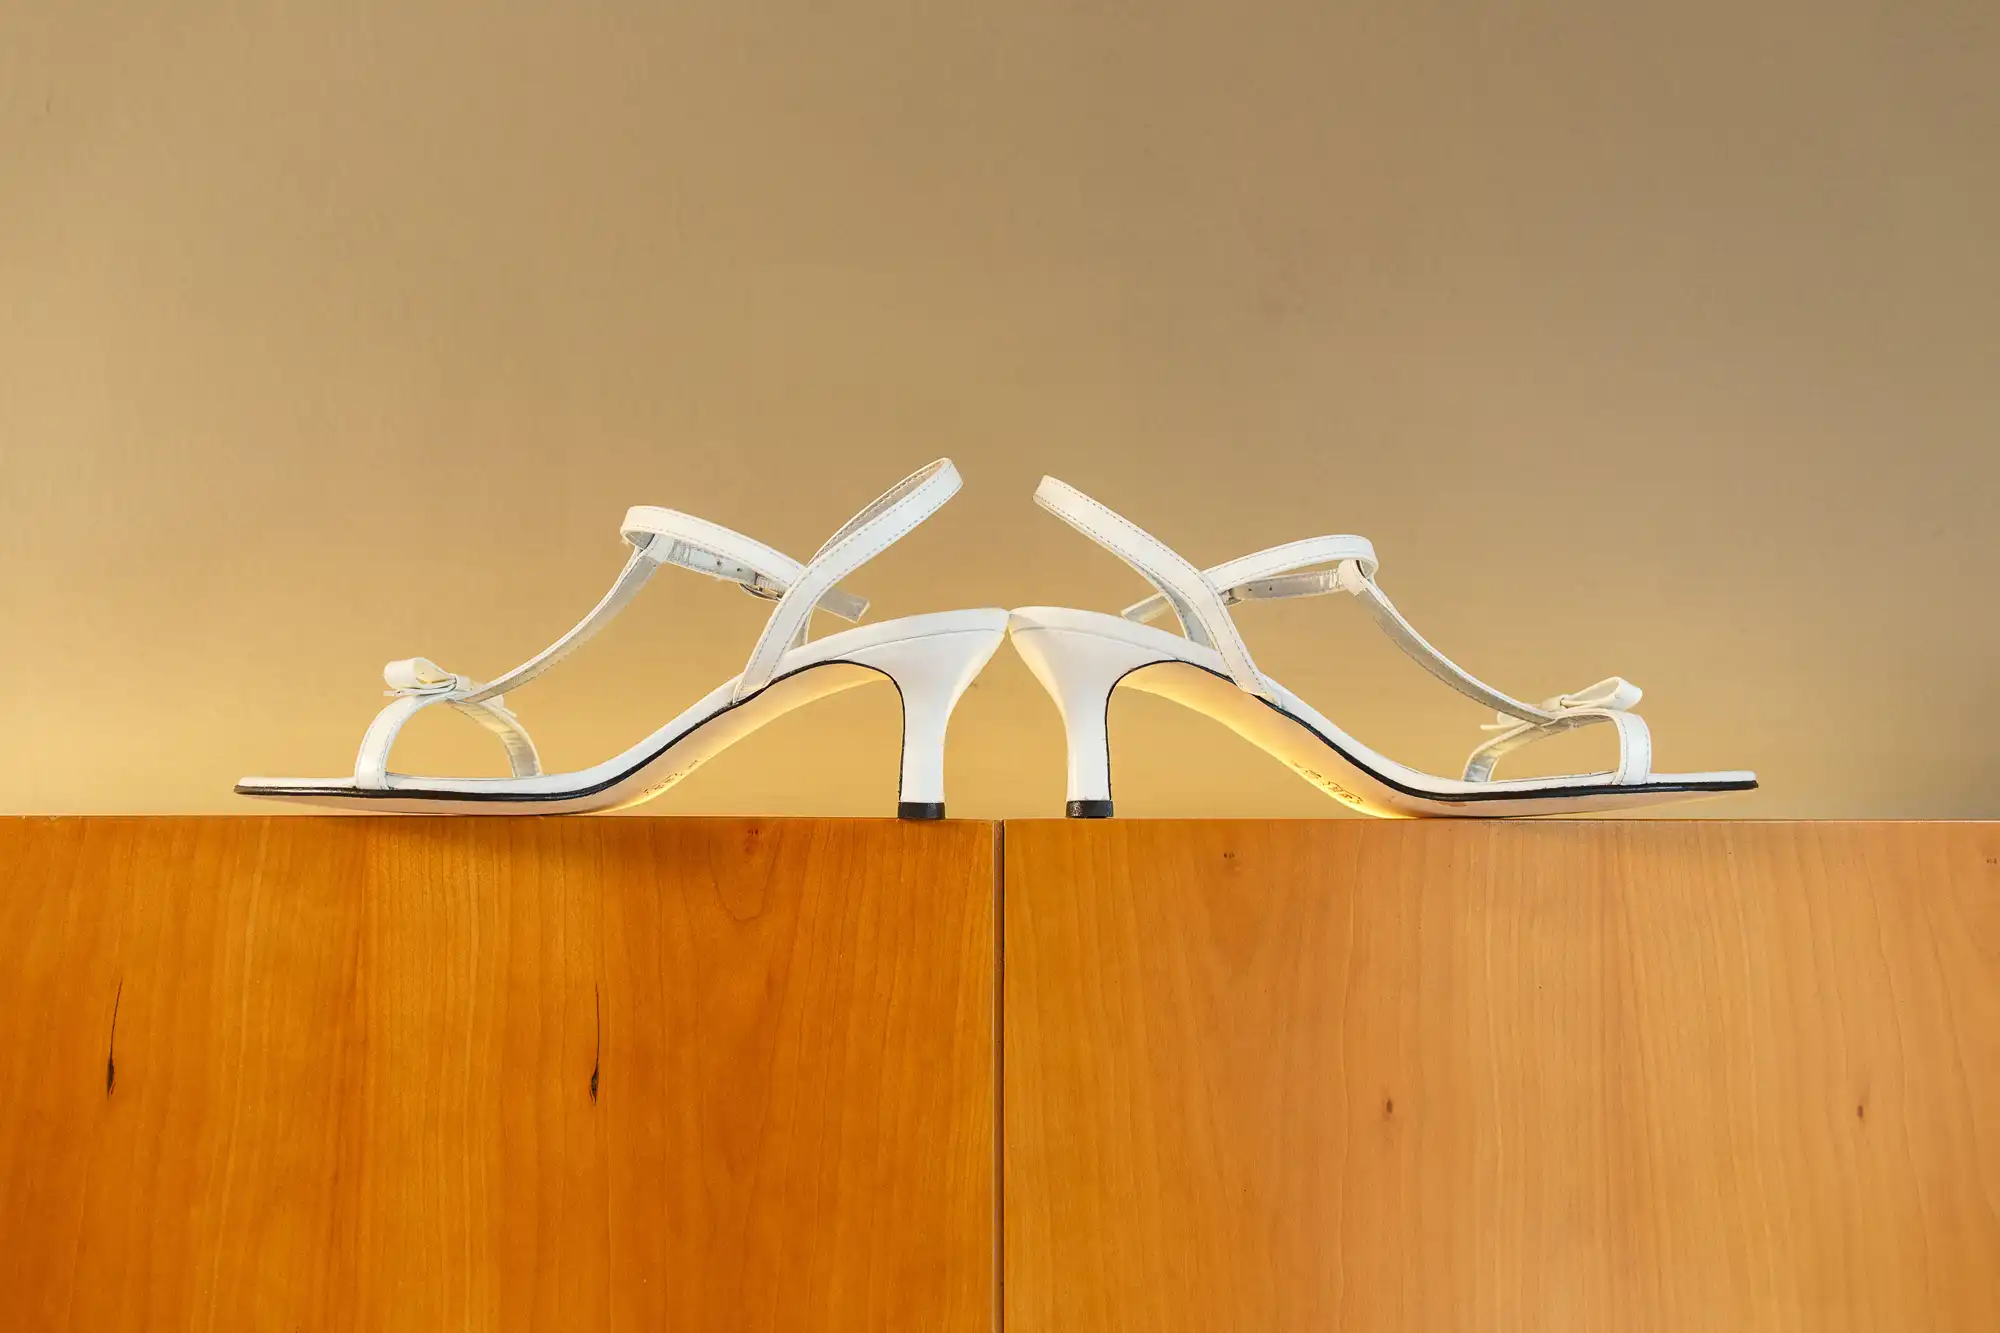 A pair of white heeled sandals with thin straps displayed on a wooden surface against an ochre background.